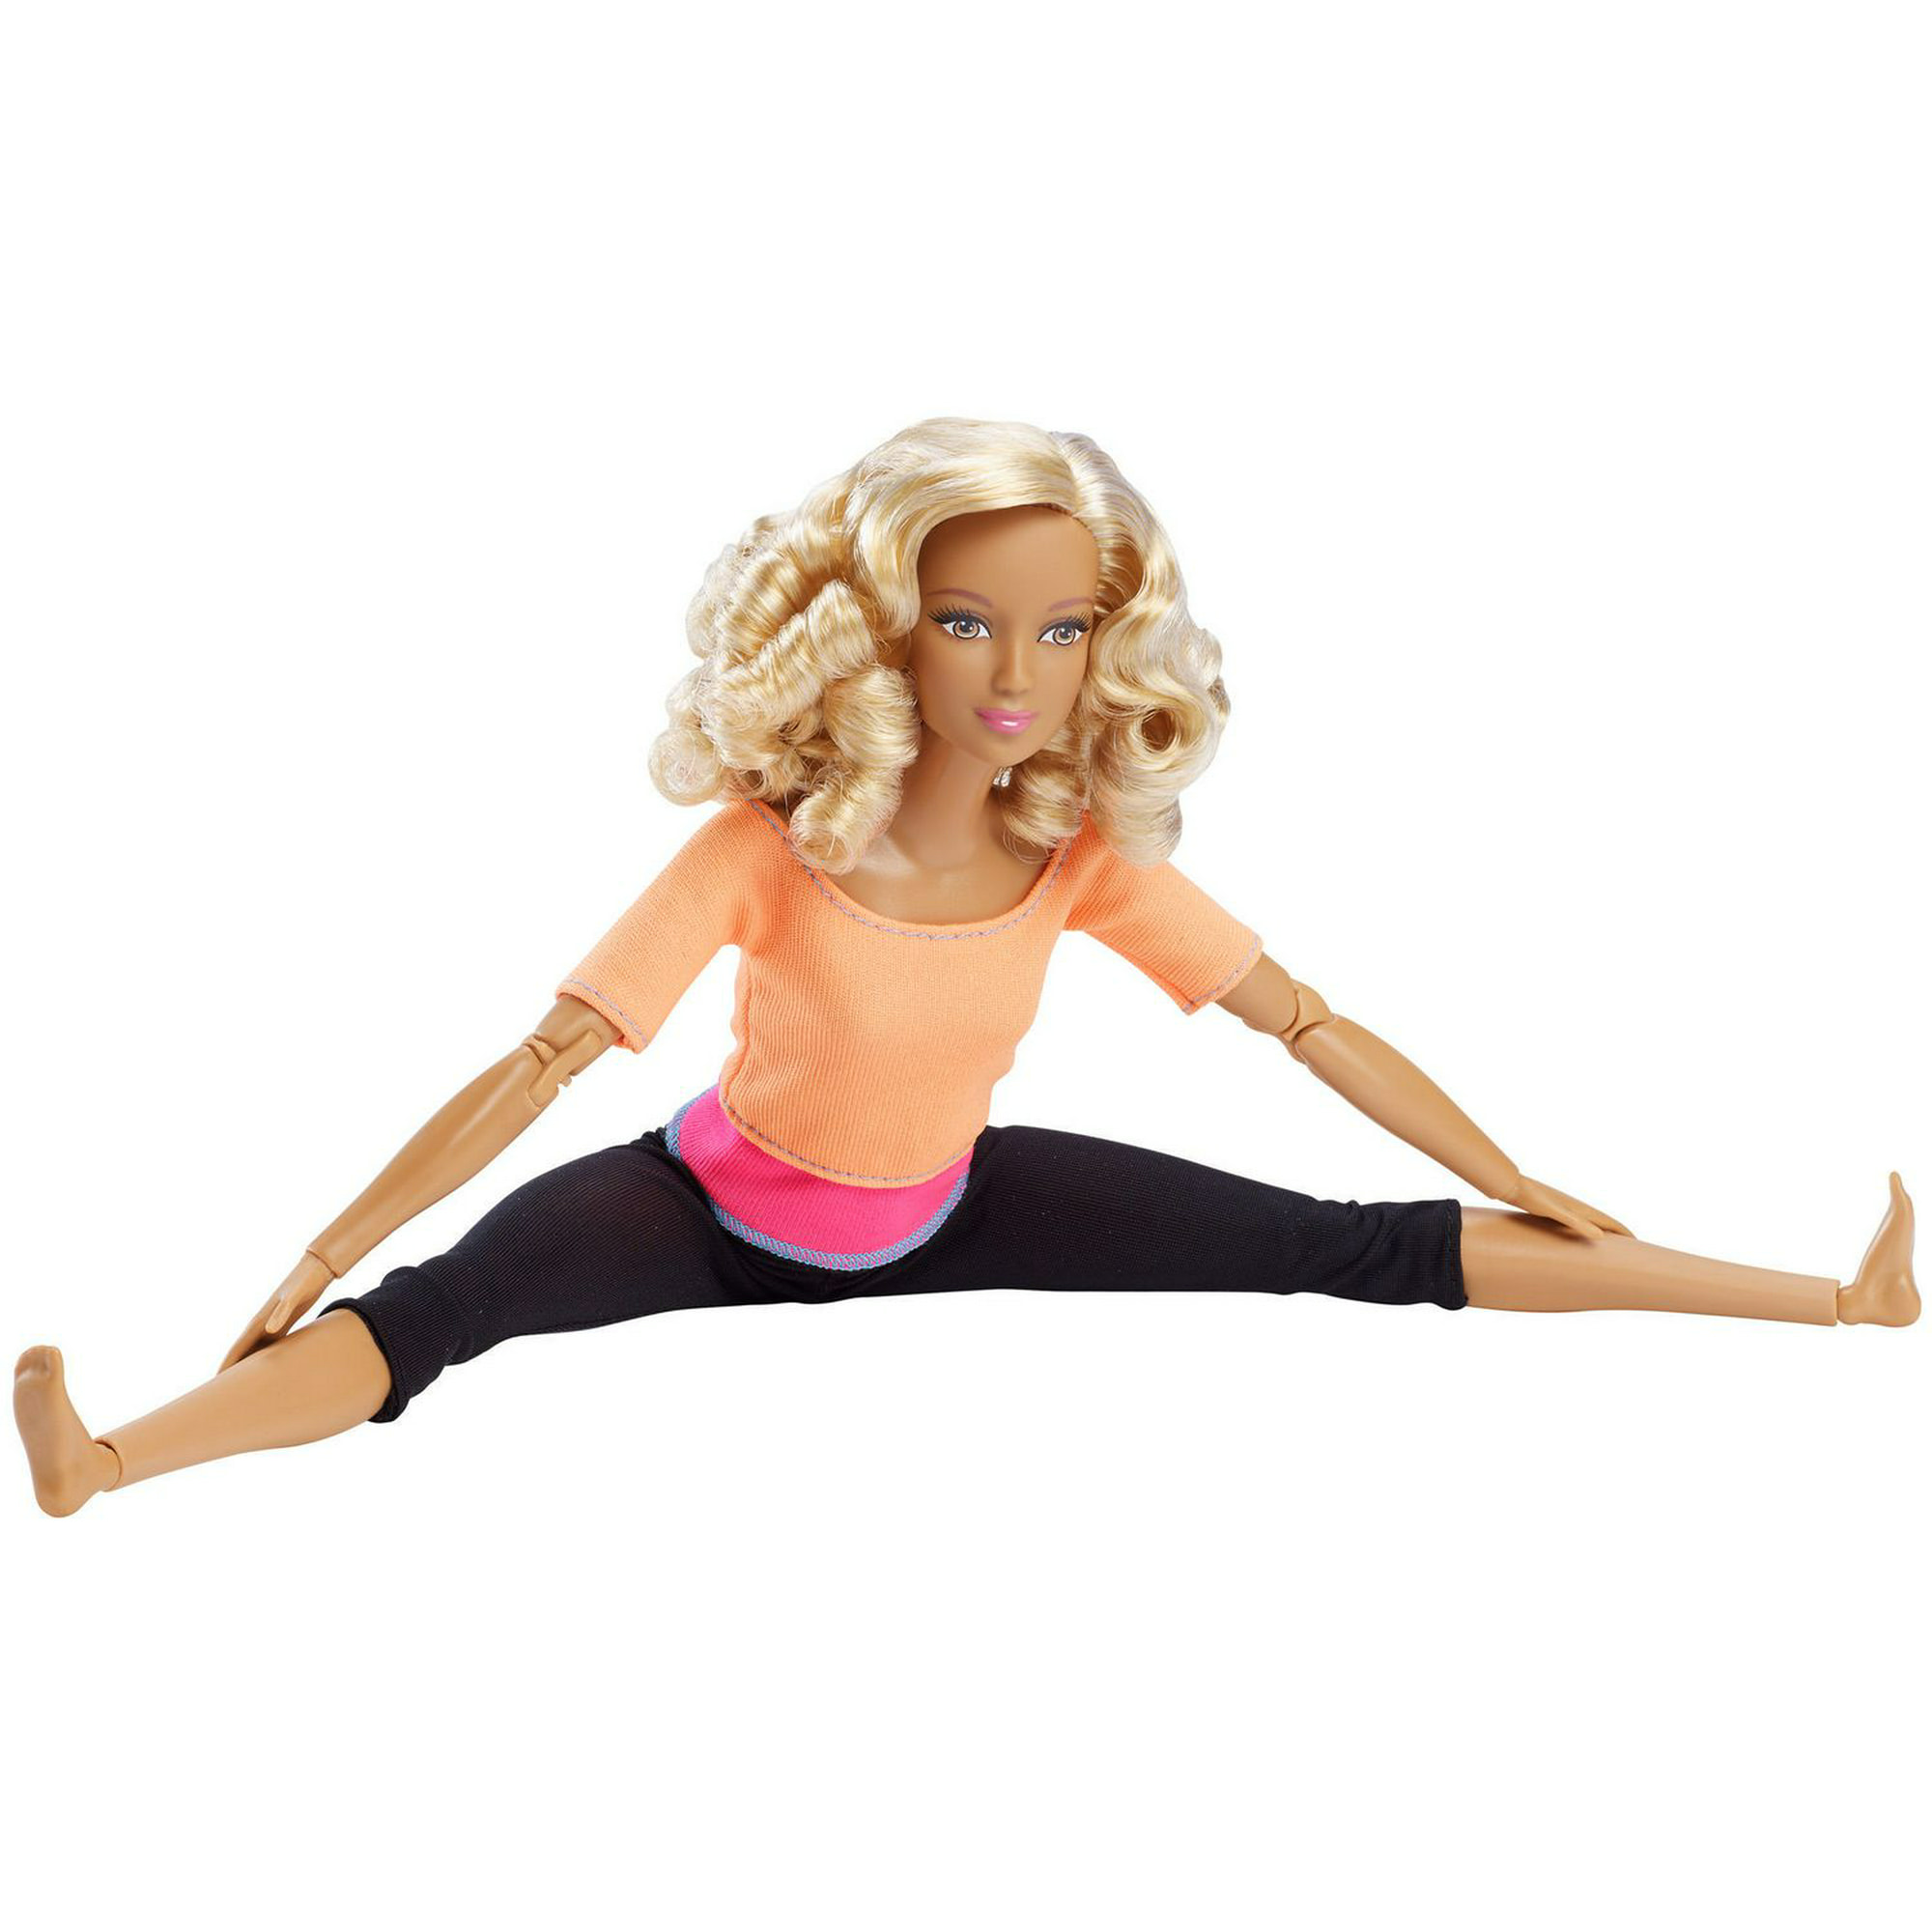  Barbie Made to Move Posable Doll in Pink Color-Blocked Top and  Yoga Leggings, Flexible with Blonde Hair ( Exclusive) : Toys & Games